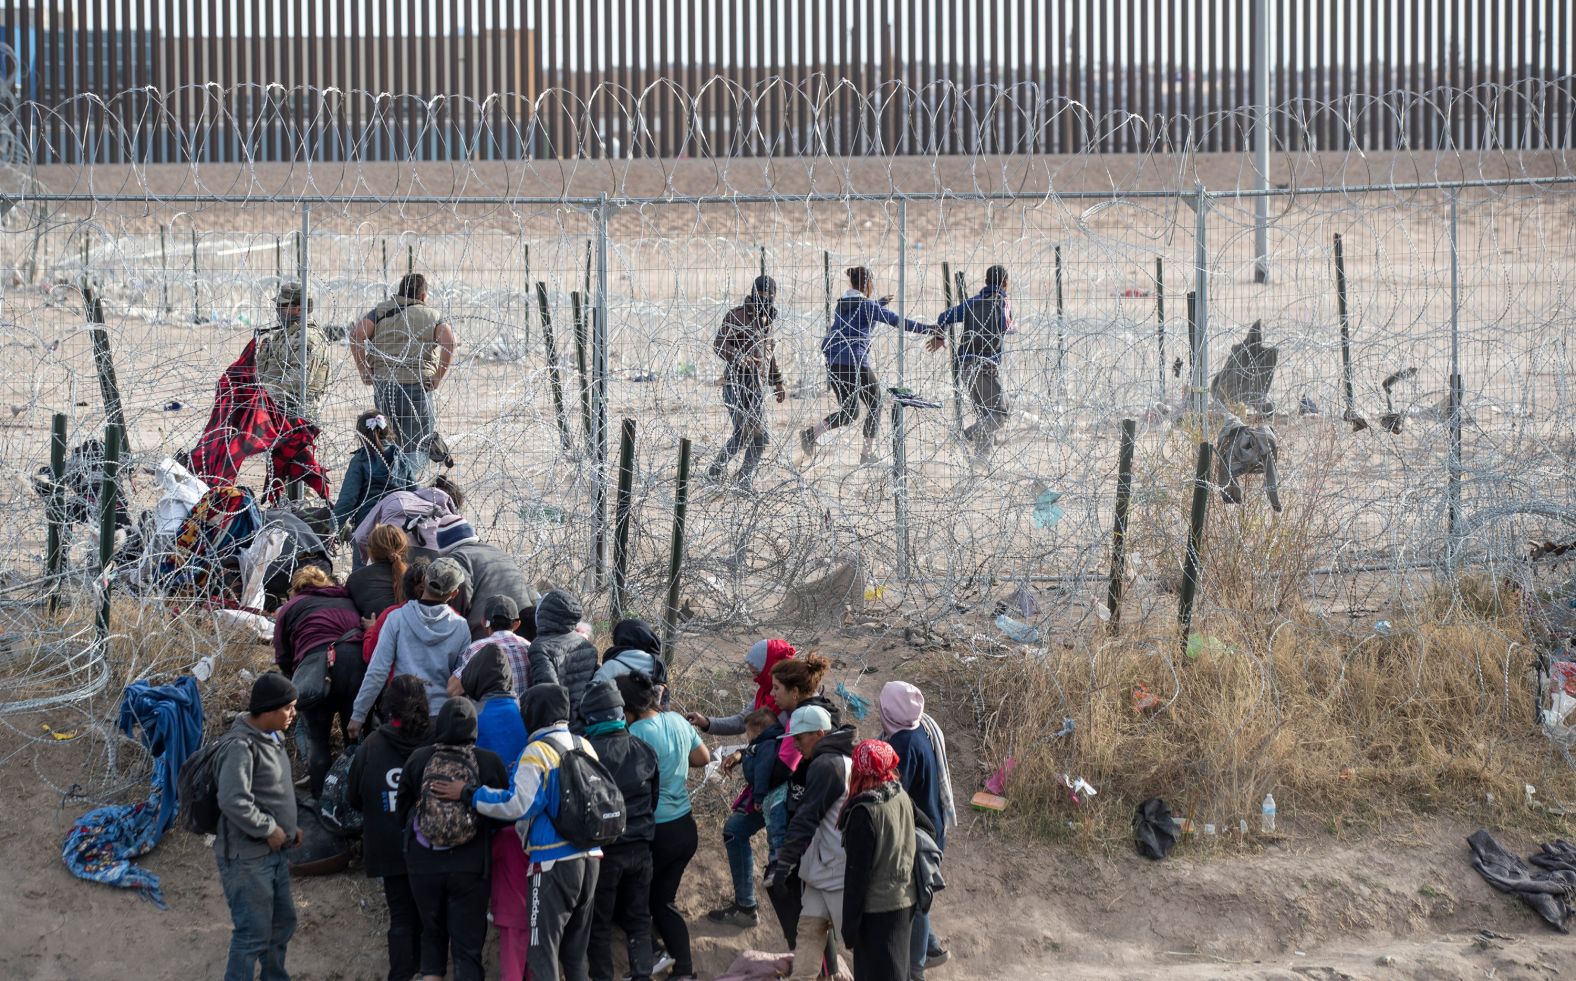 Migrants breach infrastructure set up by the Texas National Guard on the Rio Grande in El Paso, Texas, on Thursday, March 21. US Customs and Border Protection said in a statement Thursday evening that the situation is "under control." The circumstances that led to this incident are unclear.